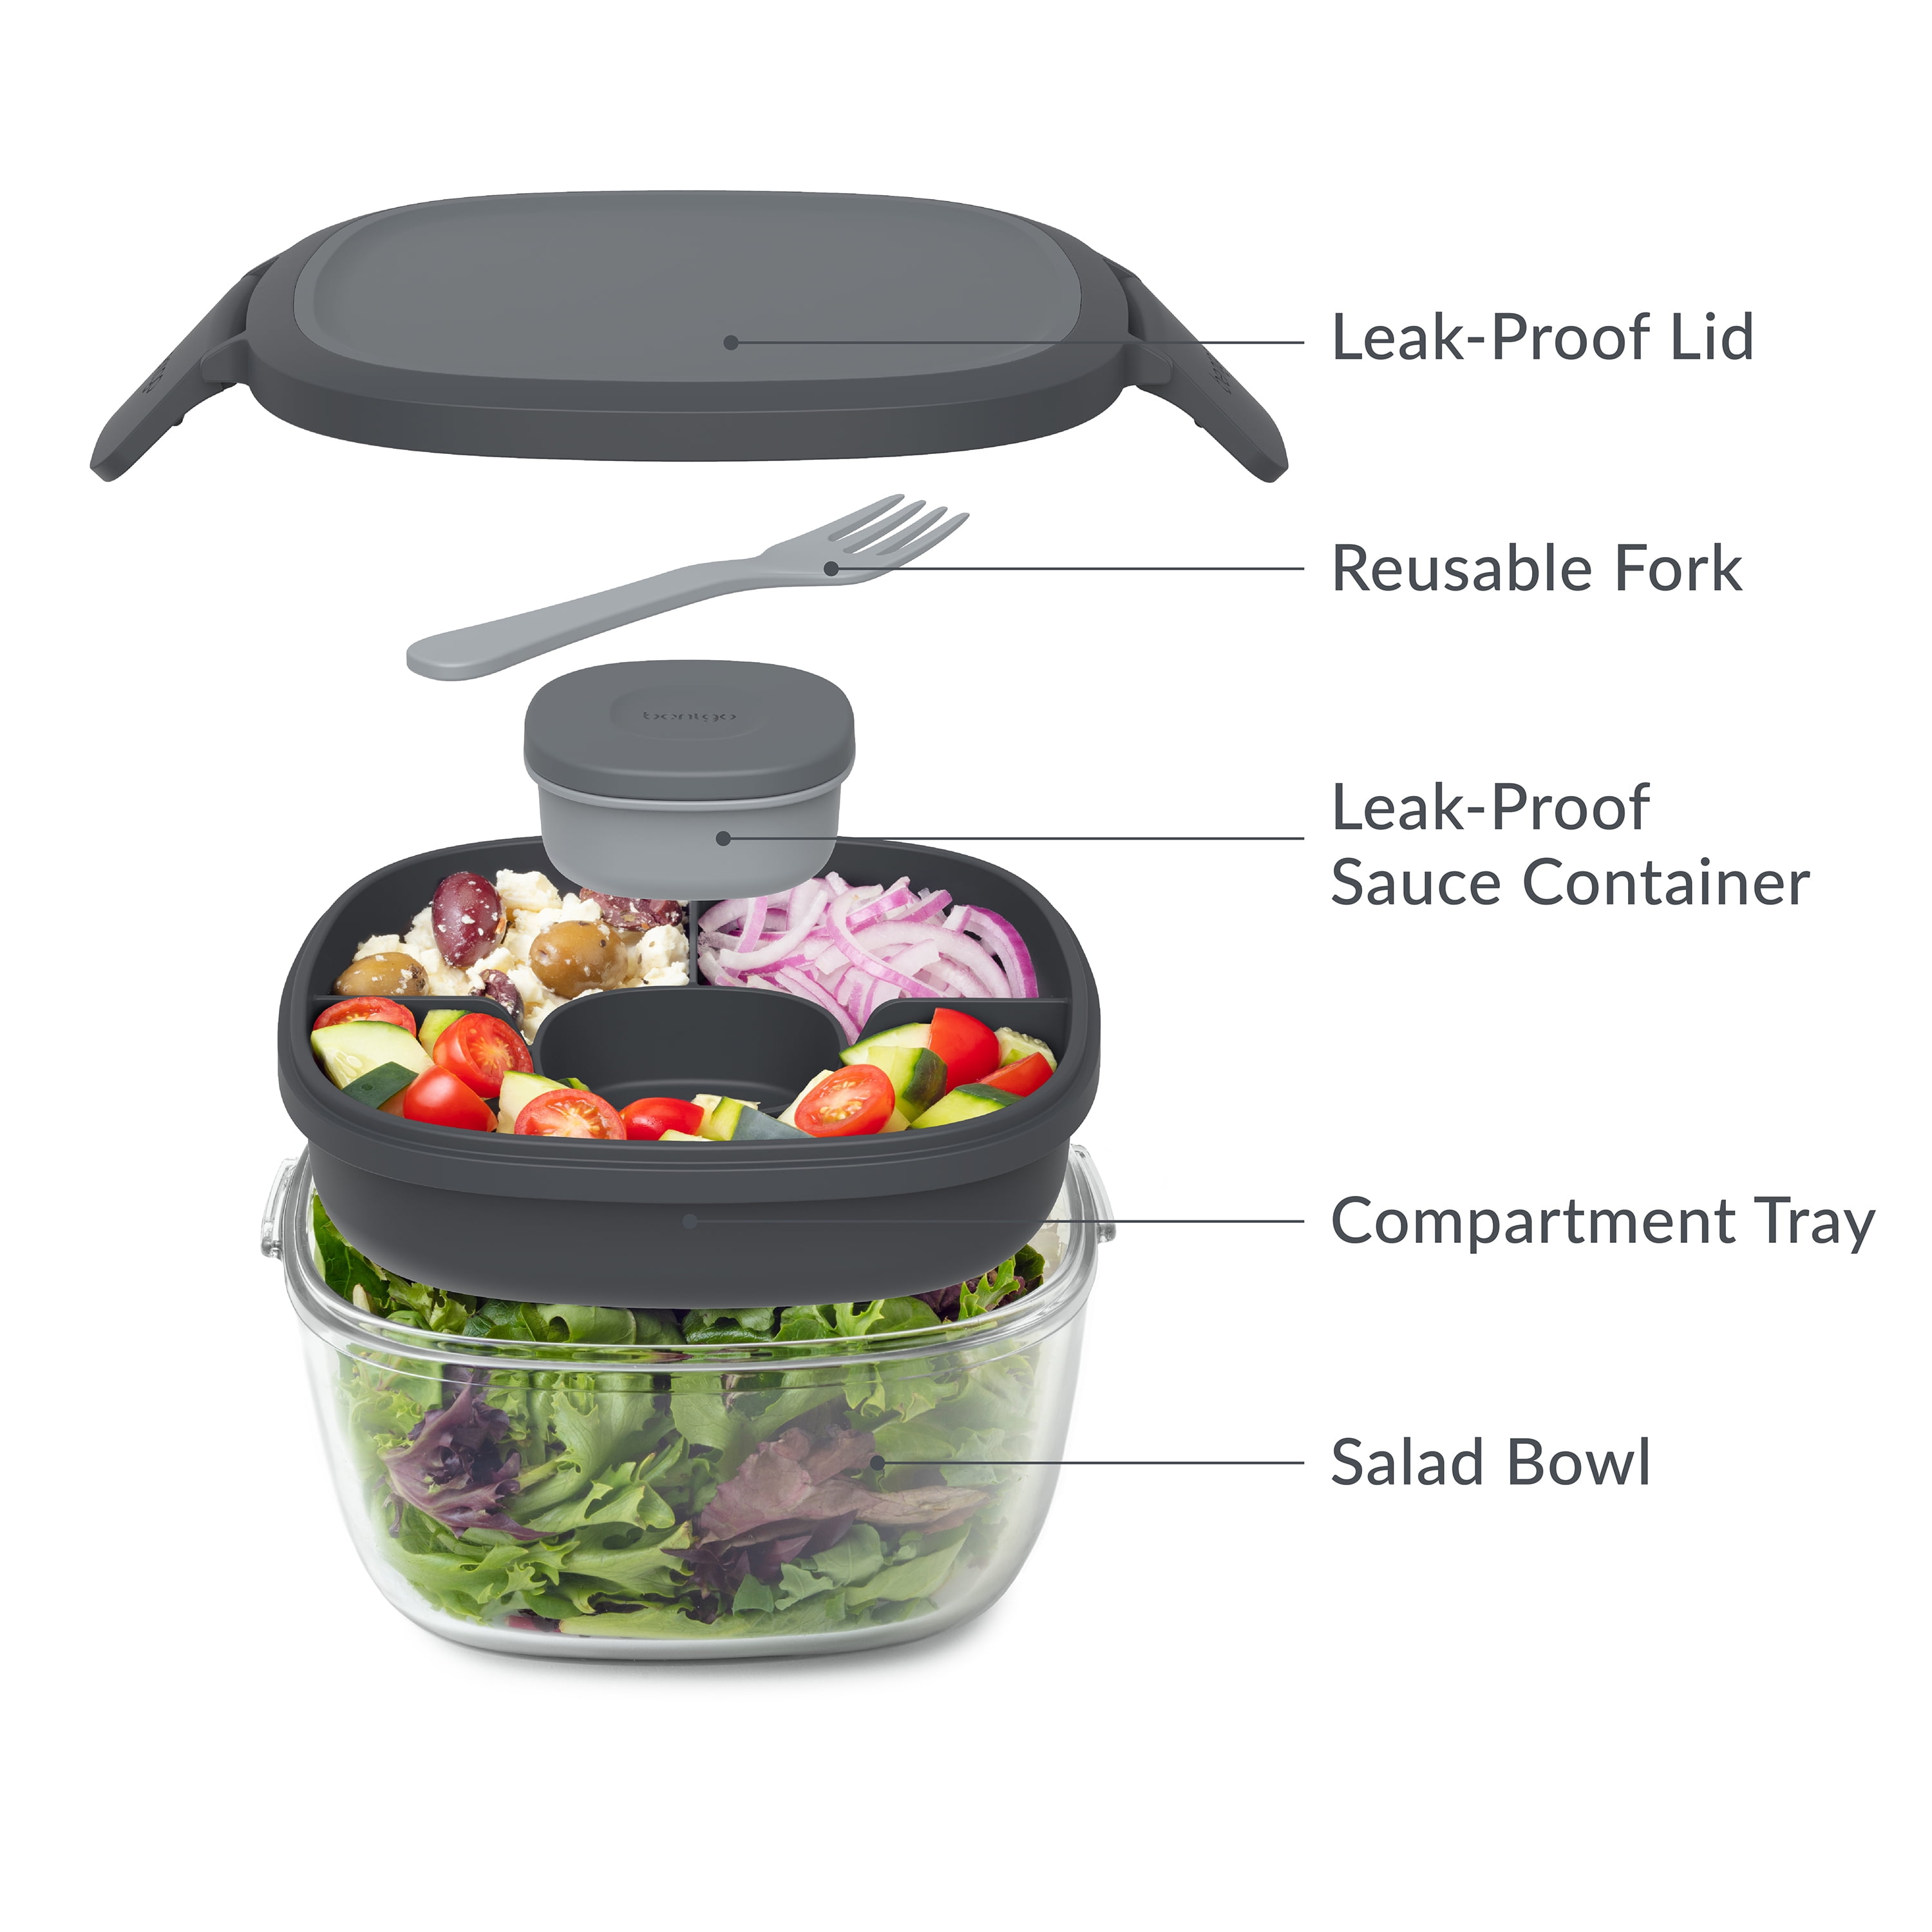 Bentgo® Glass Leak-Proof Meal Prep Set - 8-Piece Lunch & Snack 1 &  2-Compartment Glass Food Containers with Glass Lids - Reusable, BPA-Free